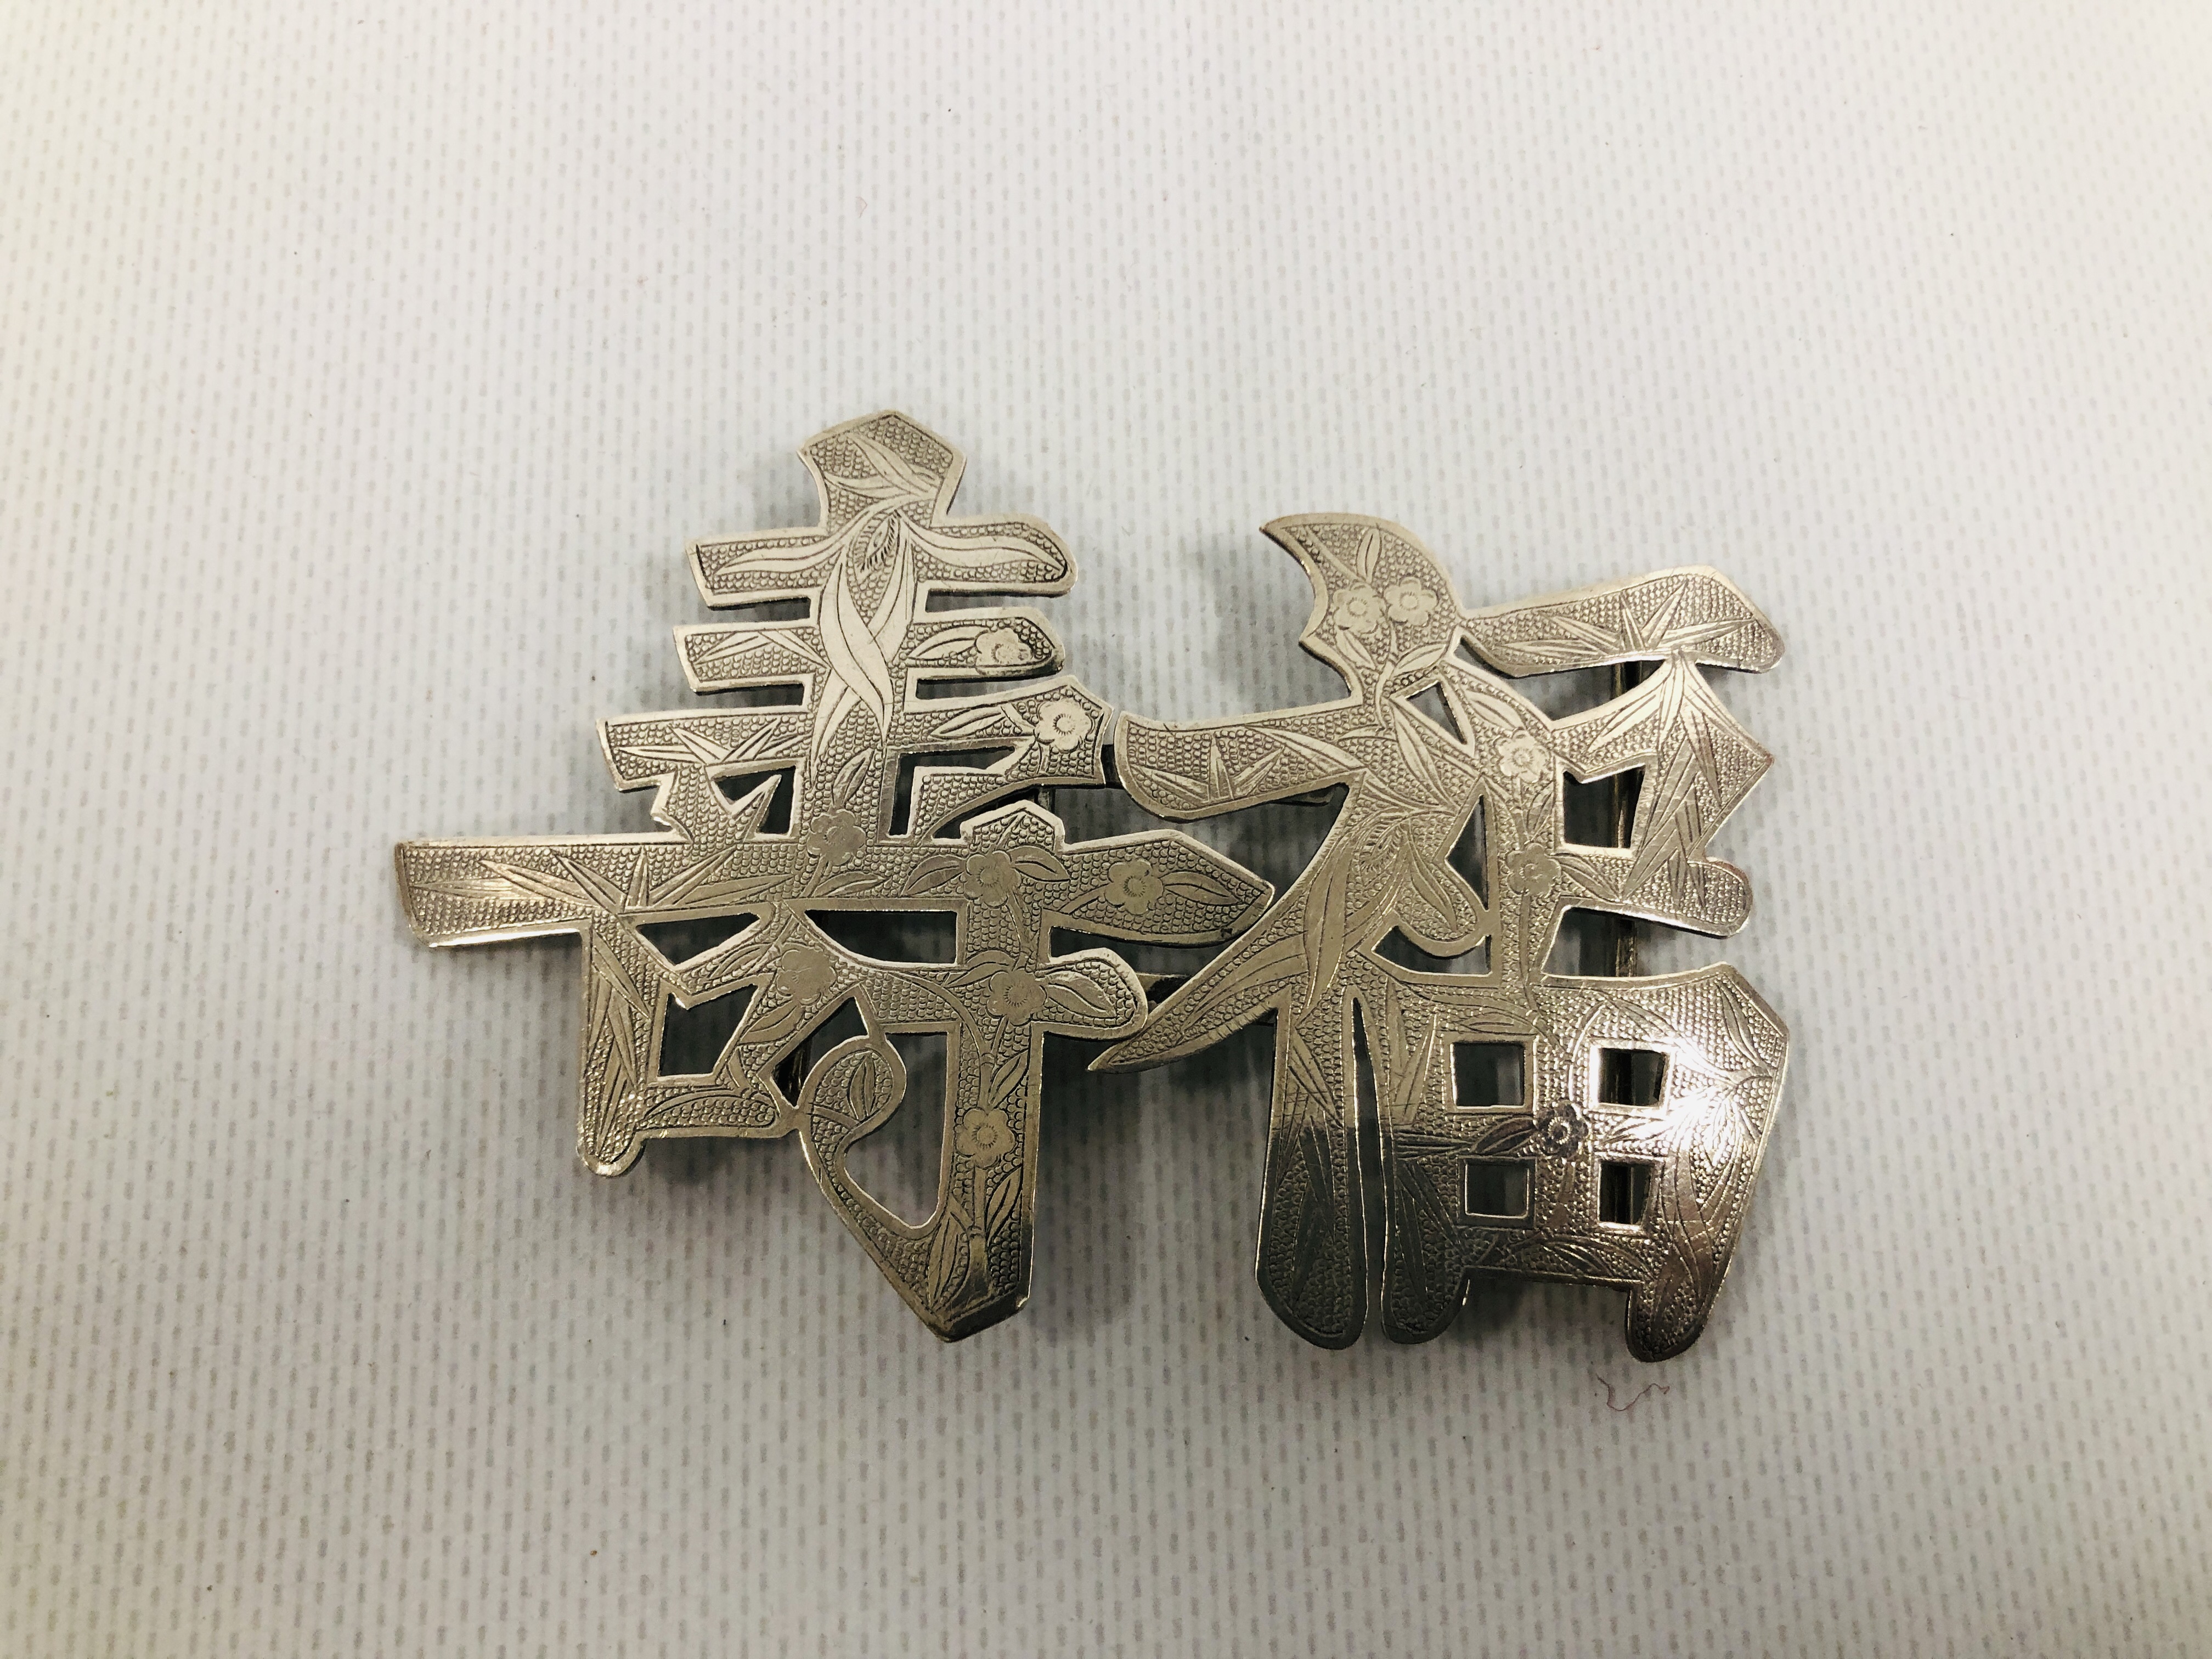 A PAIR OF CHINESE WHITE METAL BUCKLES OF CALLIGRAPHY DESIGN, L 10.25CM. - Image 2 of 4